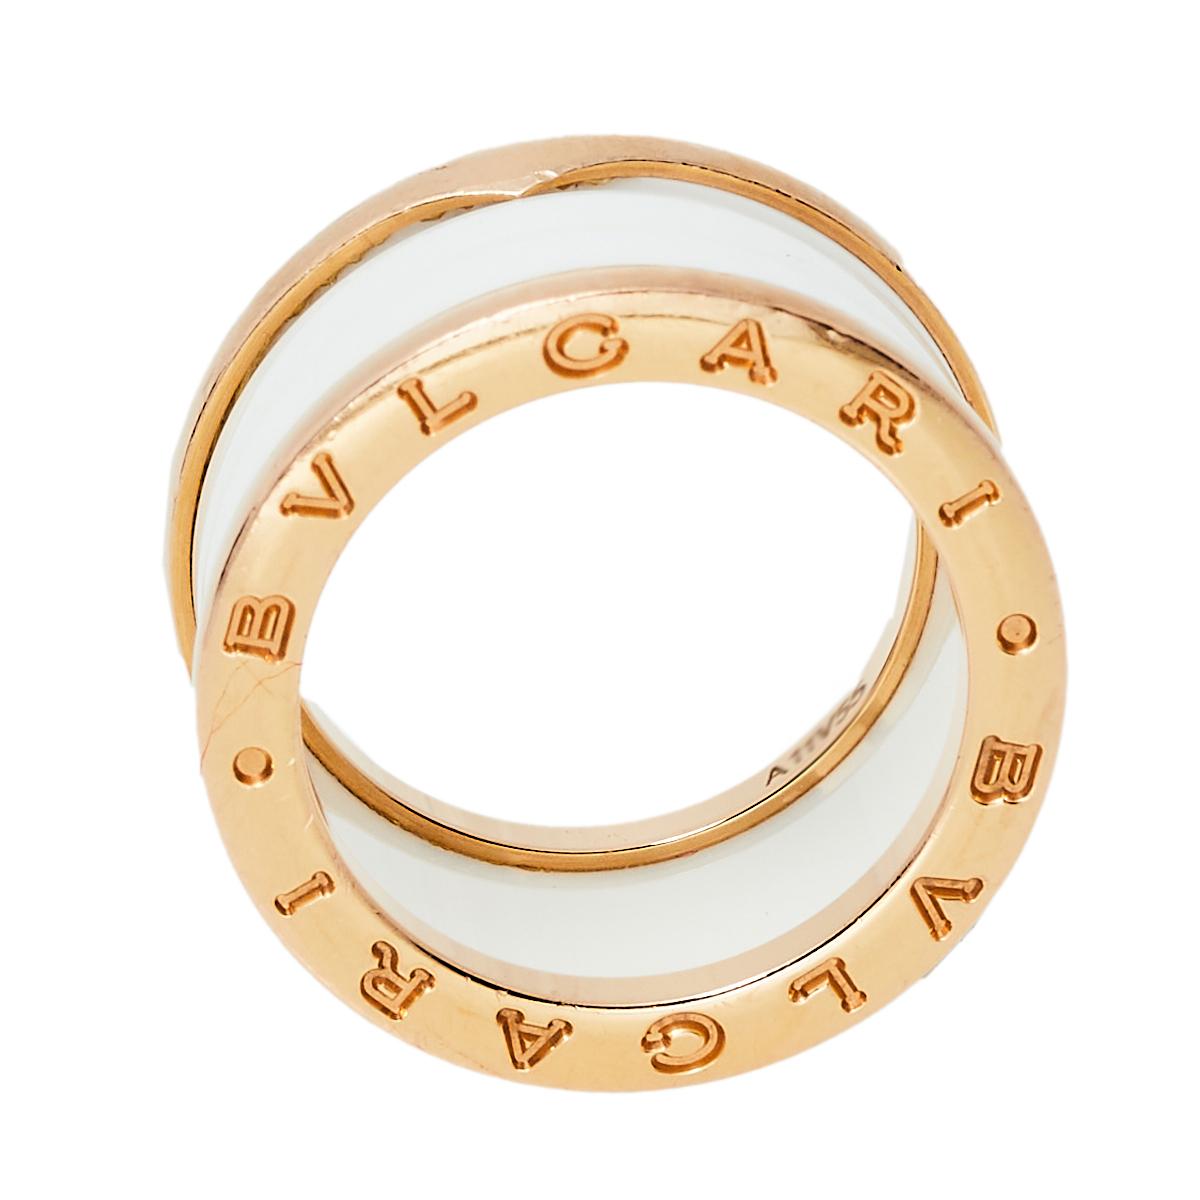 For the woman who has a refined taste in fine jewelry, Bvlgari brings her this immaculately crafted ring from a collection inspired by the Colosseum, showcasing its Roman roots. Made to be praised, the B.Zero1 ring has a modern spiral style of four